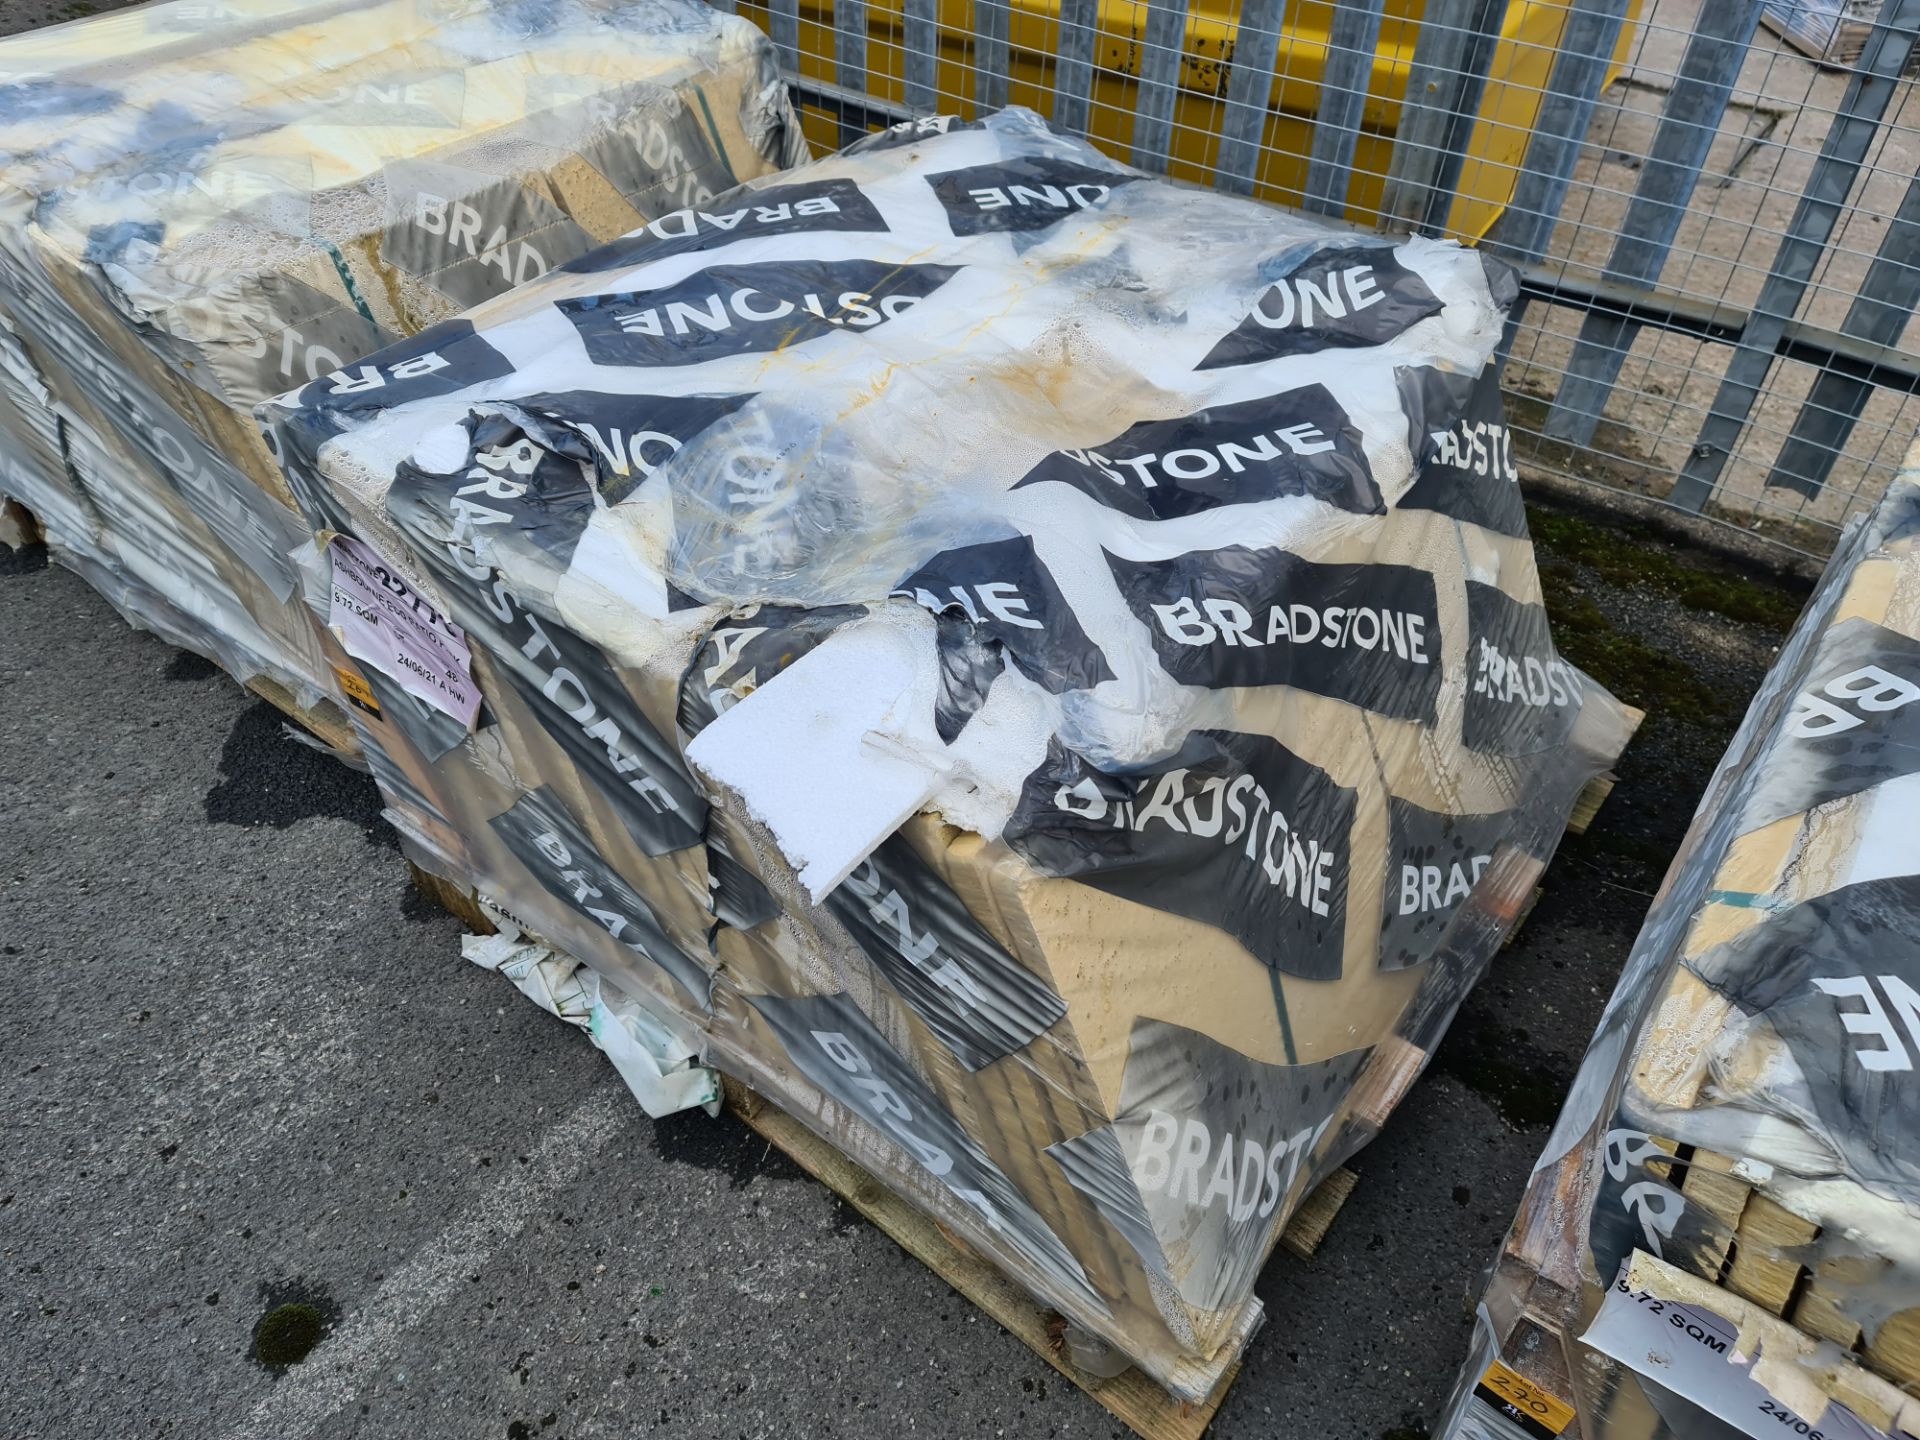 Bradstone Ashbourne Eco Patio pack of tiles measuring 9.72 square metres in total. This lot include - Image 2 of 3